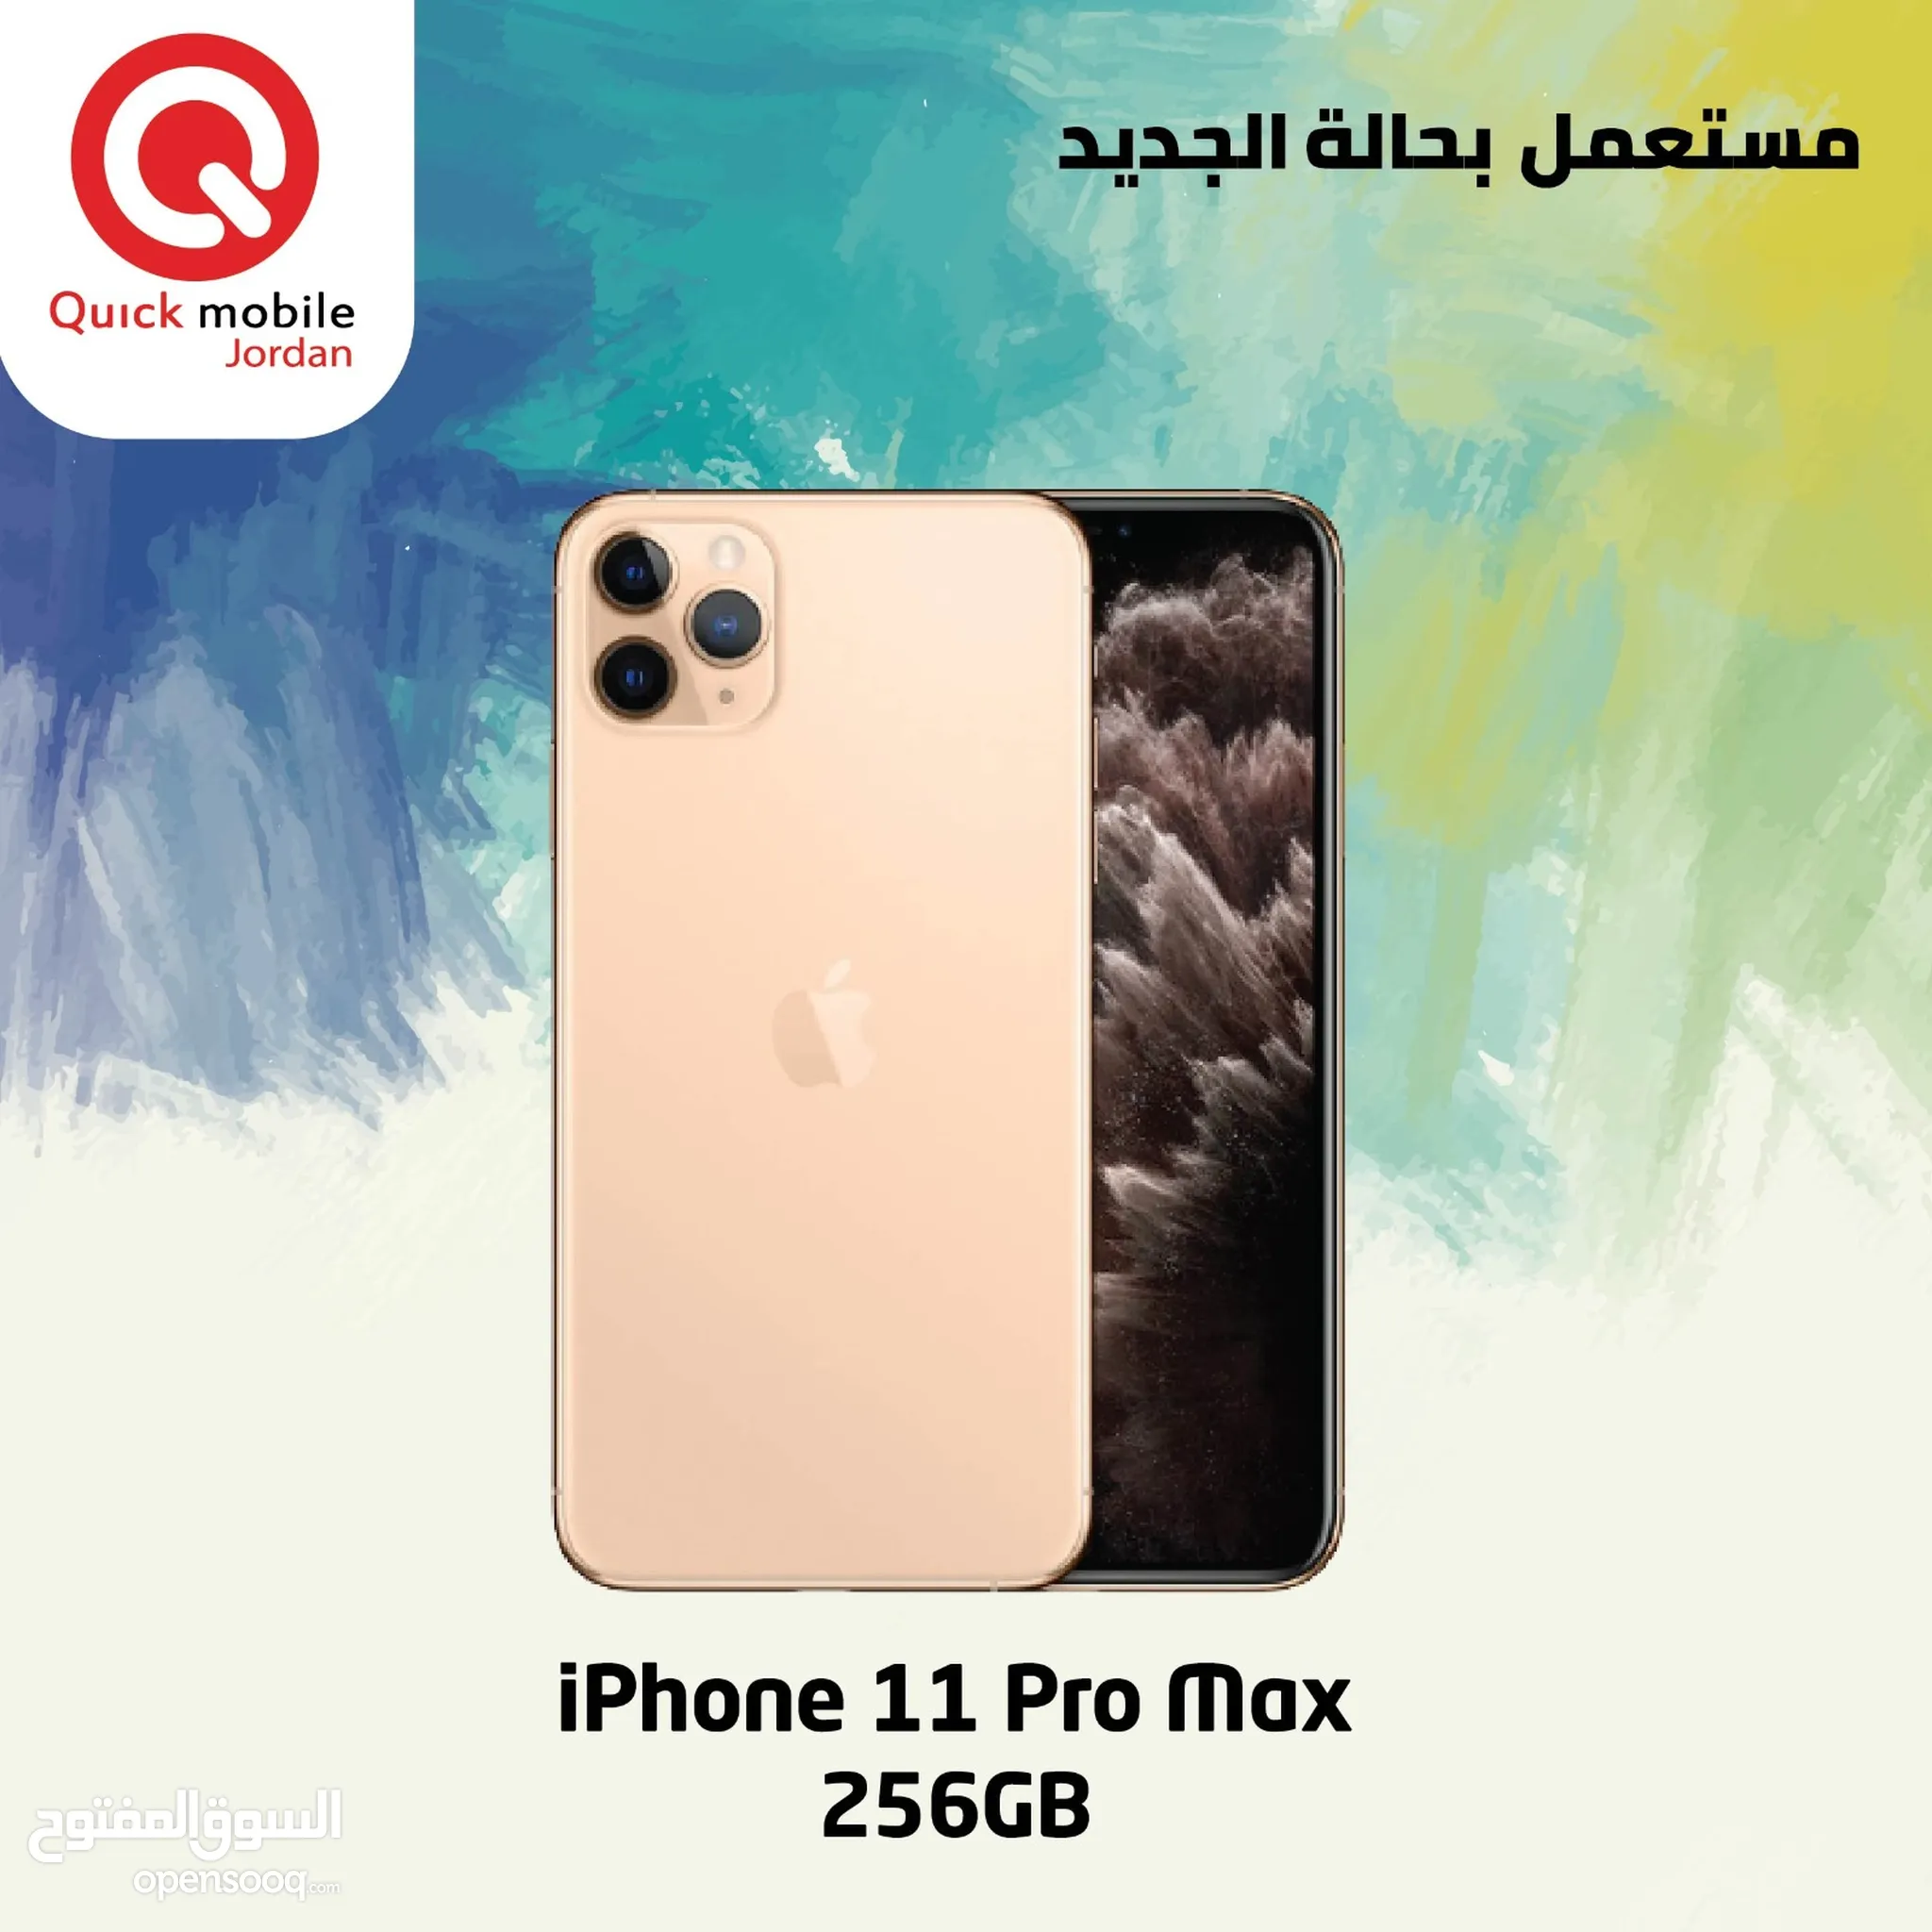 Mobile - Tablet Mobiles : Apple iPhone 11 Pro Max 256 GB : (Page 2) :  Jordan | OpenSooq